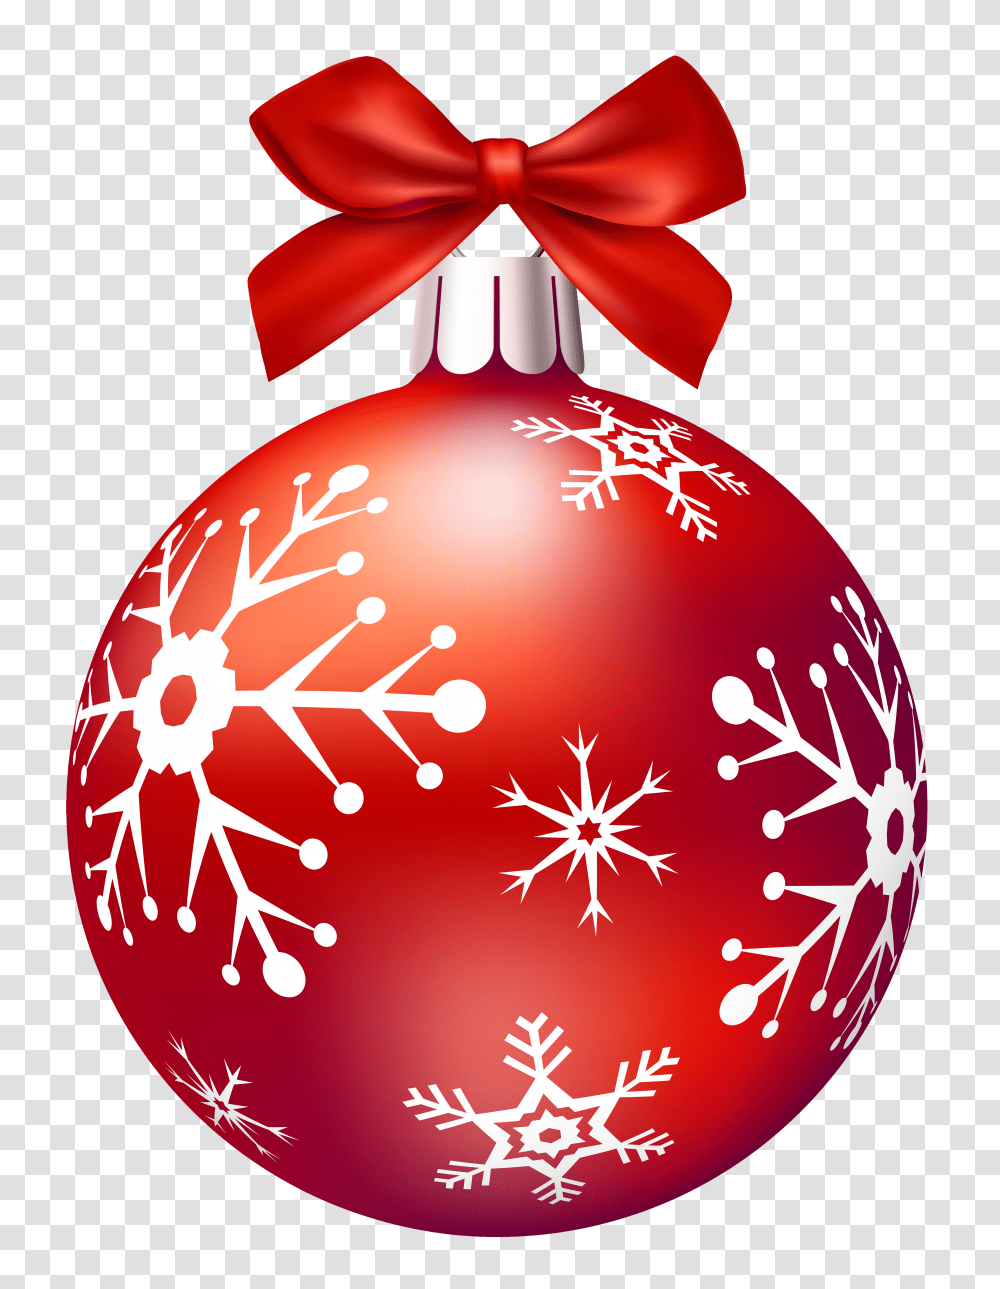 Red Christmas Balls Clip Art Christmas Balls Red, Graphics, Floral Design, Pattern, Flare Transparent Png